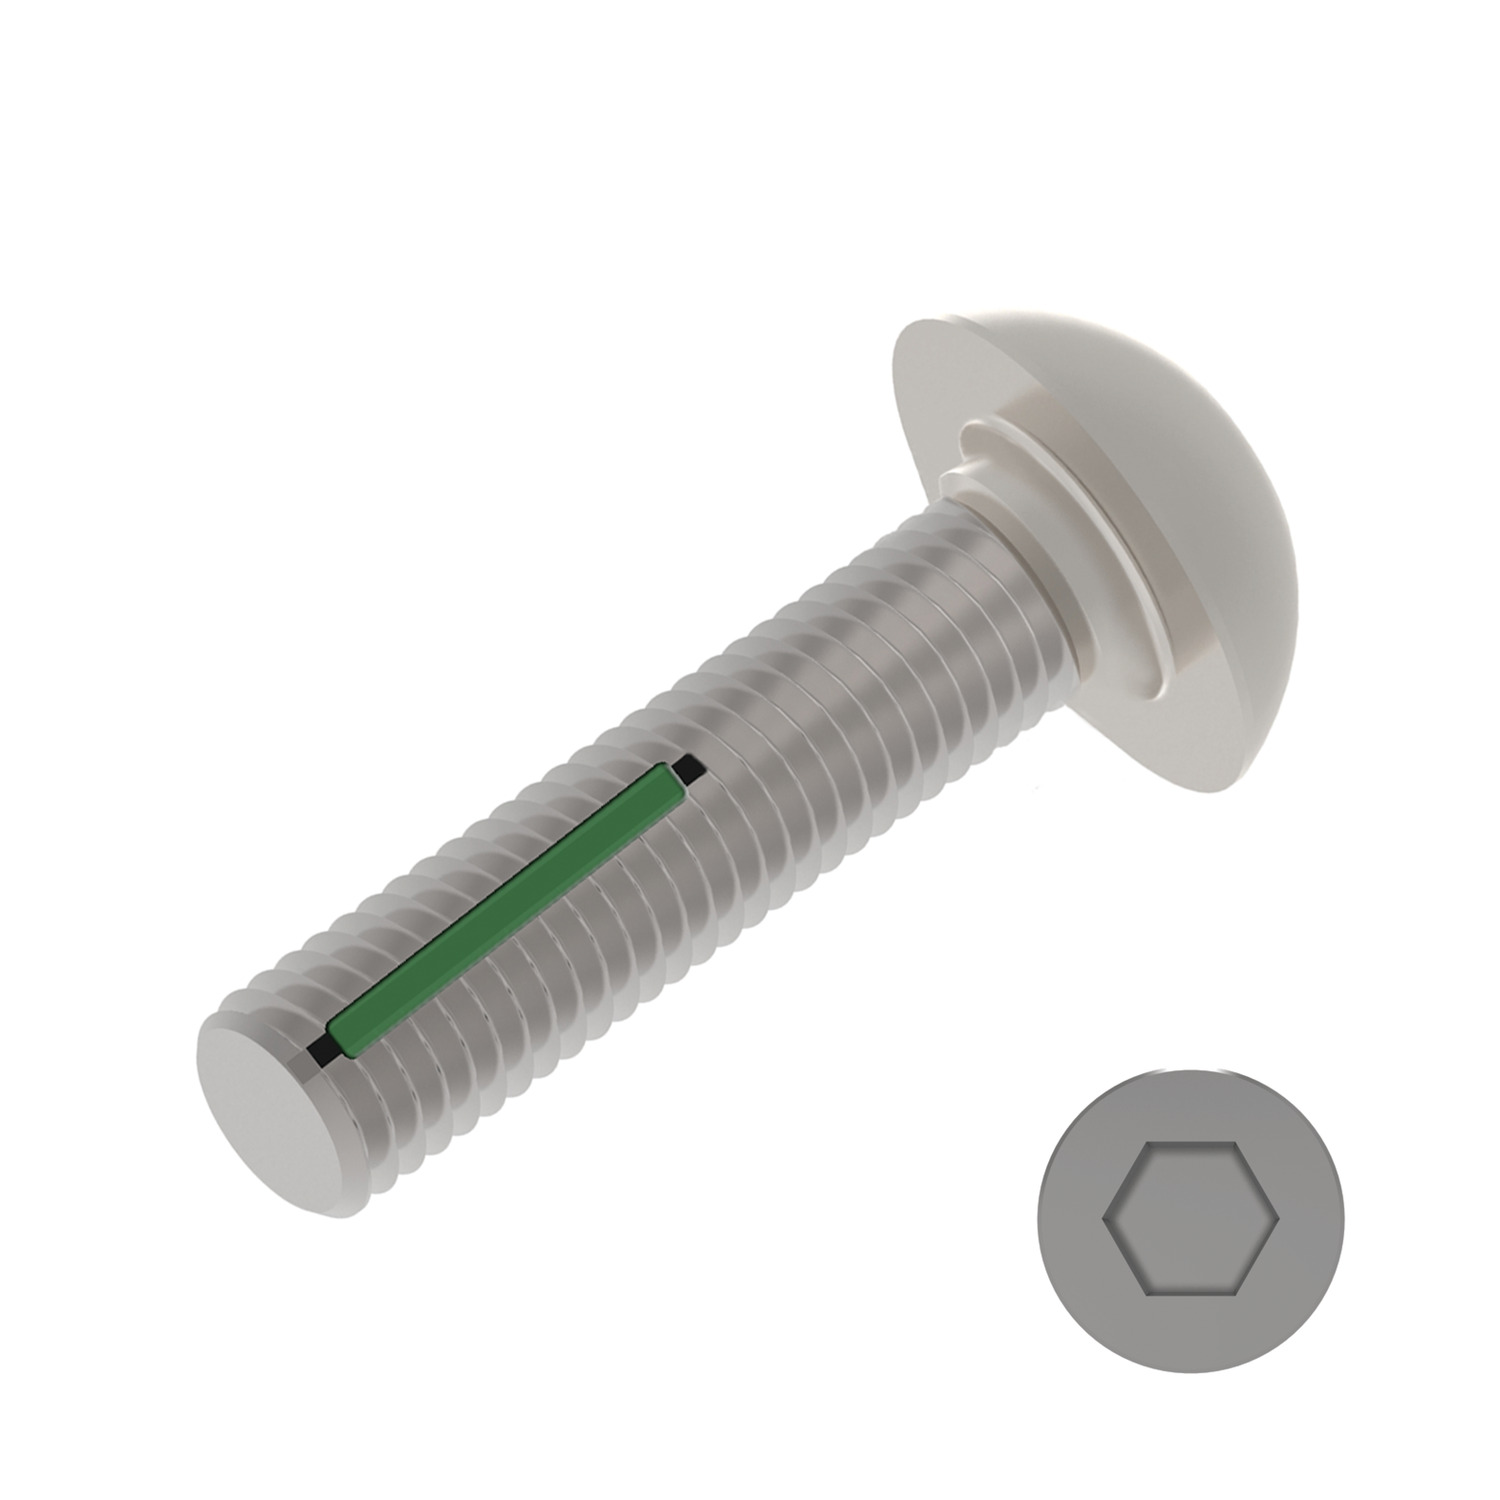 Self-Locking Button Head Screws Standard green locking patch. Breakaway torque values are complex and can be calculated on request.